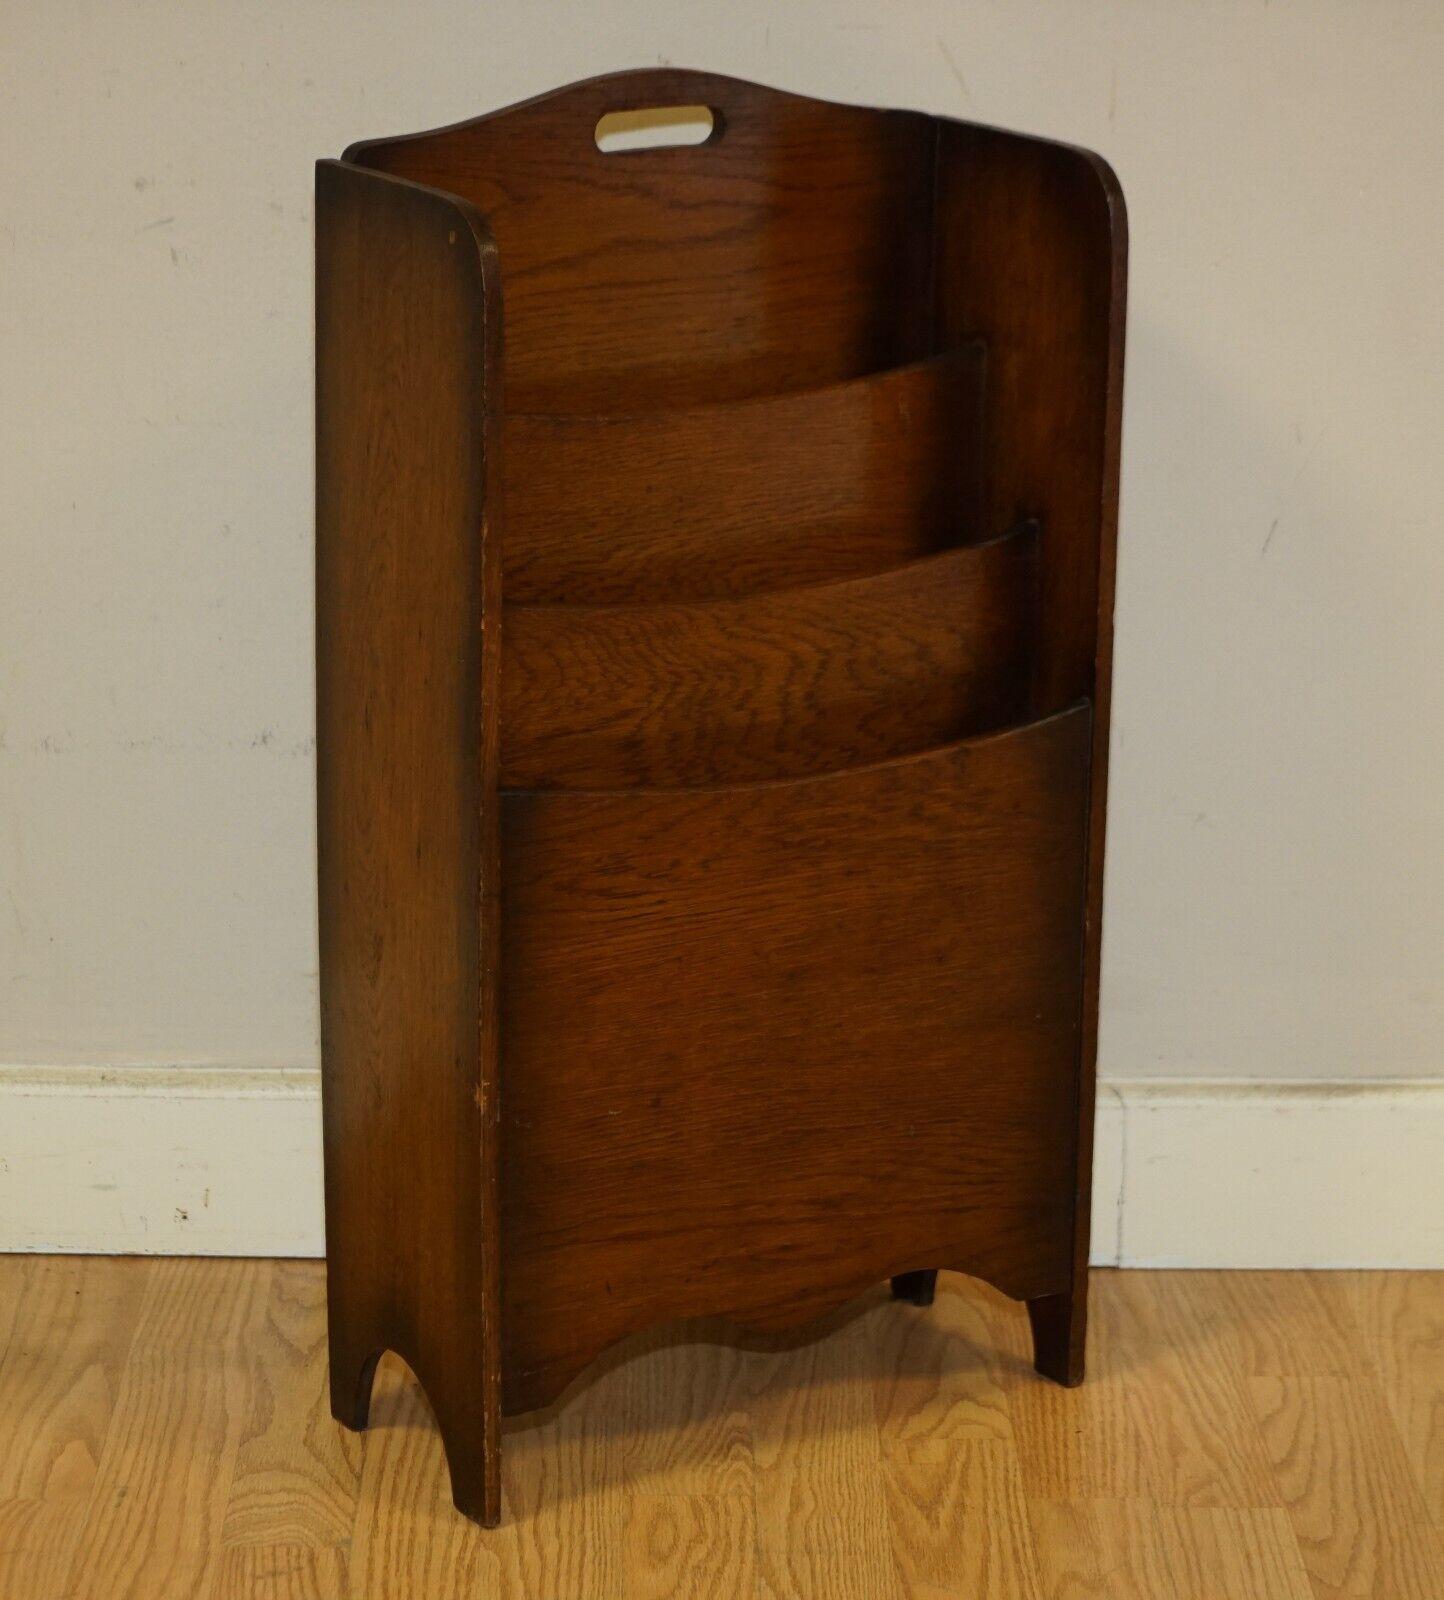 Here we have for sale this Art Deco free standing magazine newspaper rack, stand. This lovely looking stand has a rich patina and a few small signs of wear which are to be expected in original vintage pieces like this, it has been waxed and polished